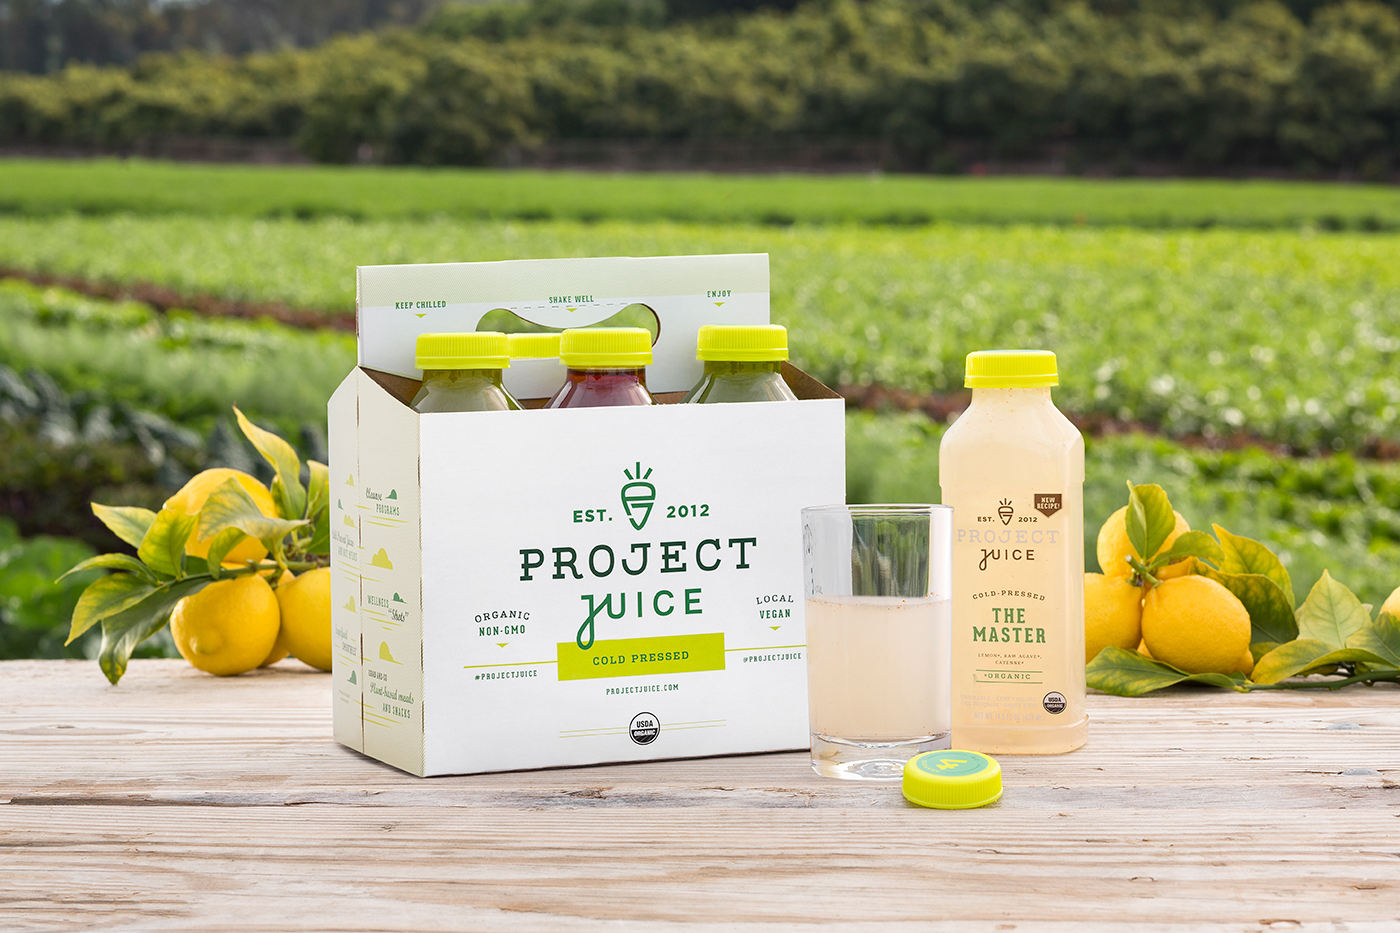 Project Juice packaging with lemons against farmland